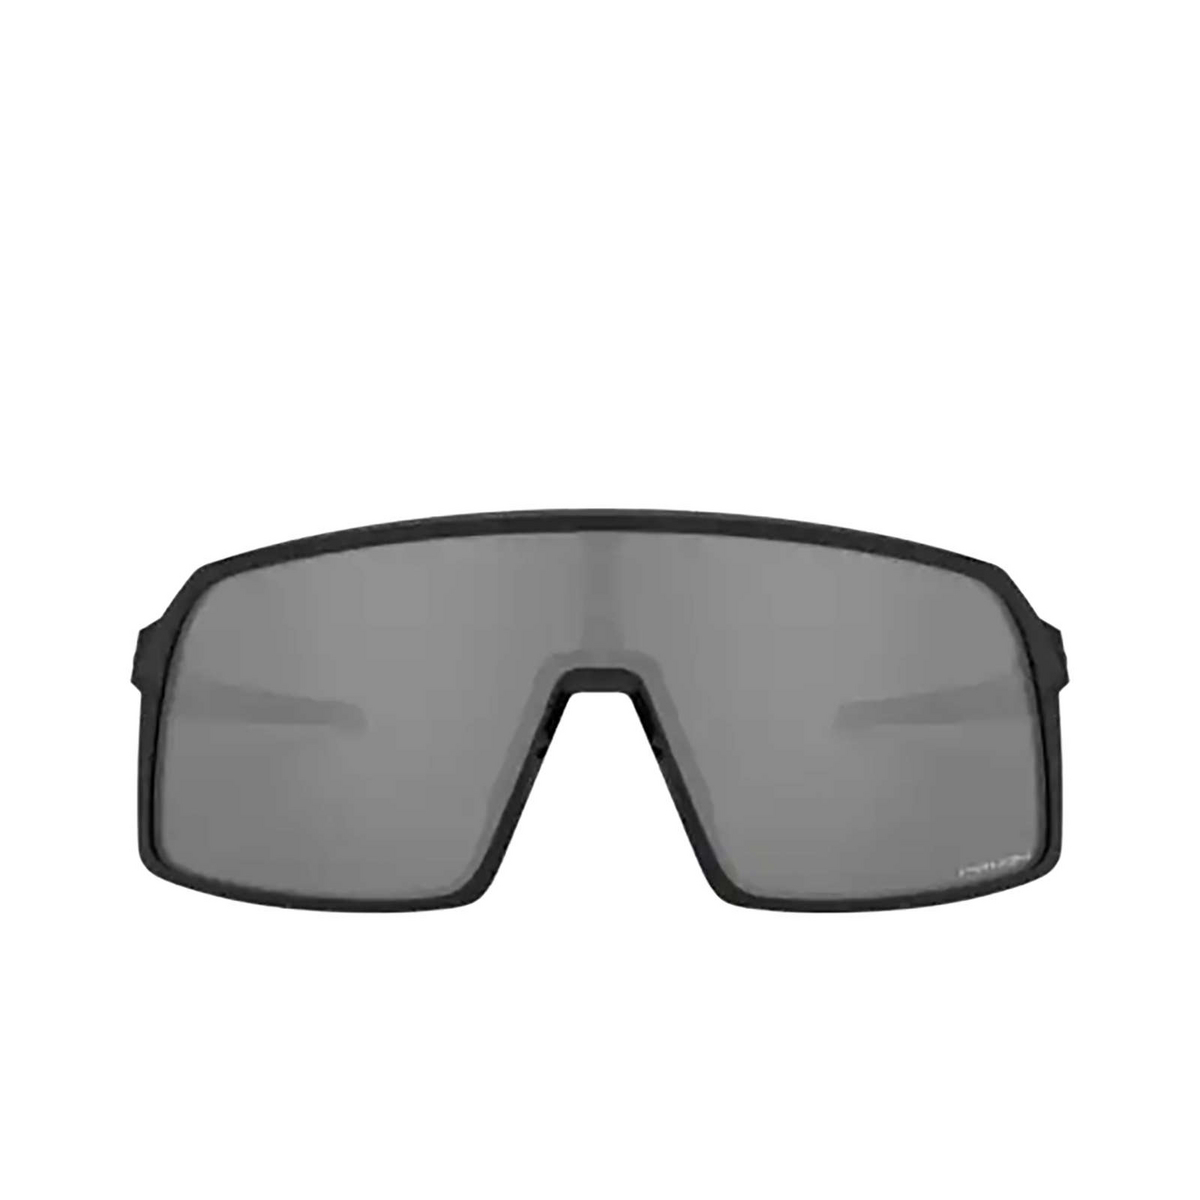 Oakley SUTRO Sunglasses 940601 Polished Black - front view